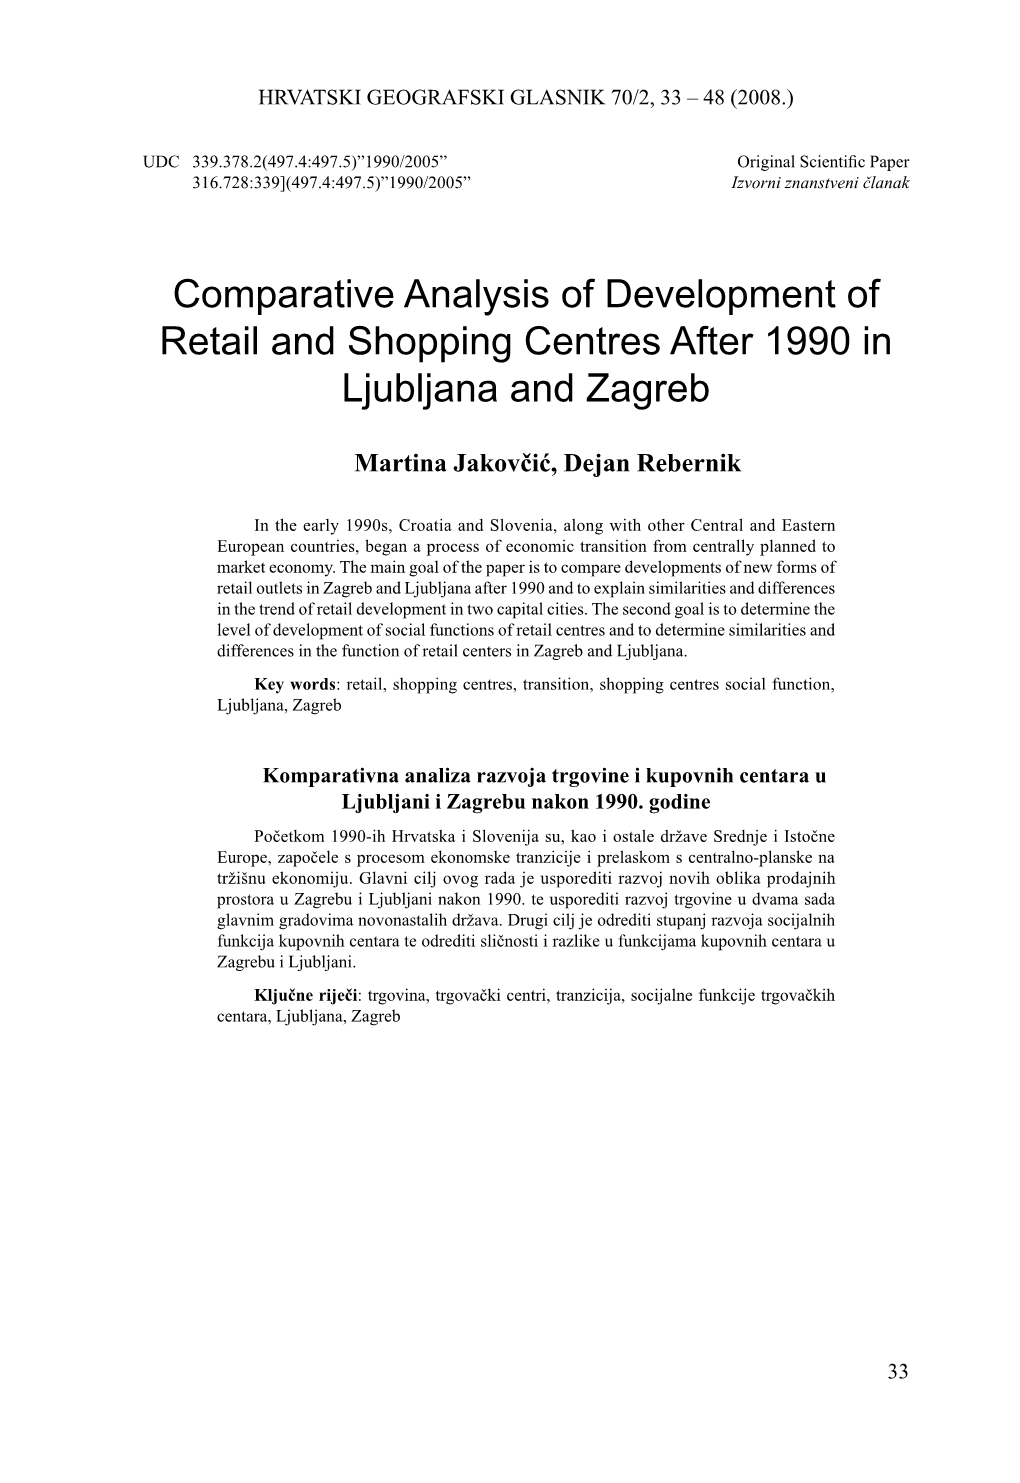 Comparative Analysis of Development of Retail and Shopping Centres After 1990 in Ljubljana and Zagreb